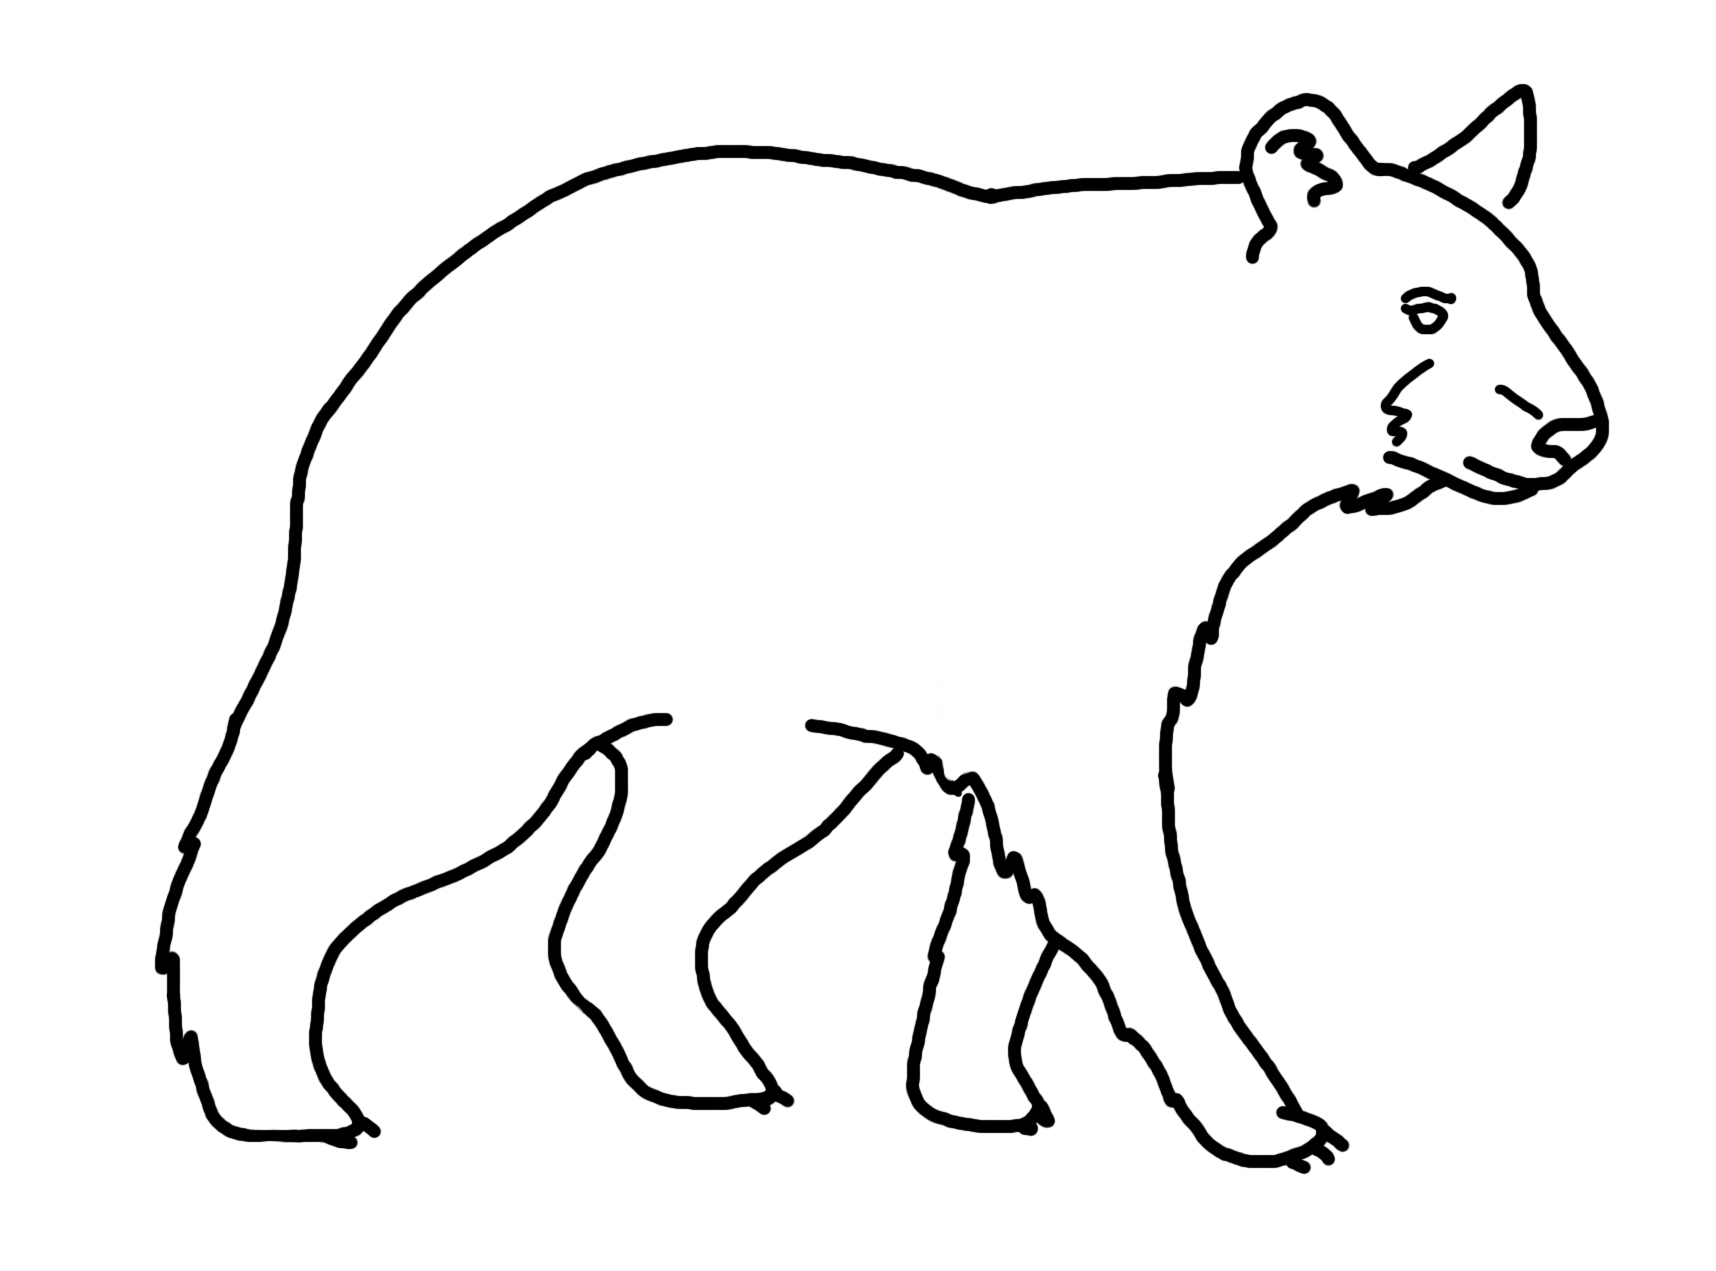 29 Bear Line Drawing   Free Cliparts That You Can Download To You